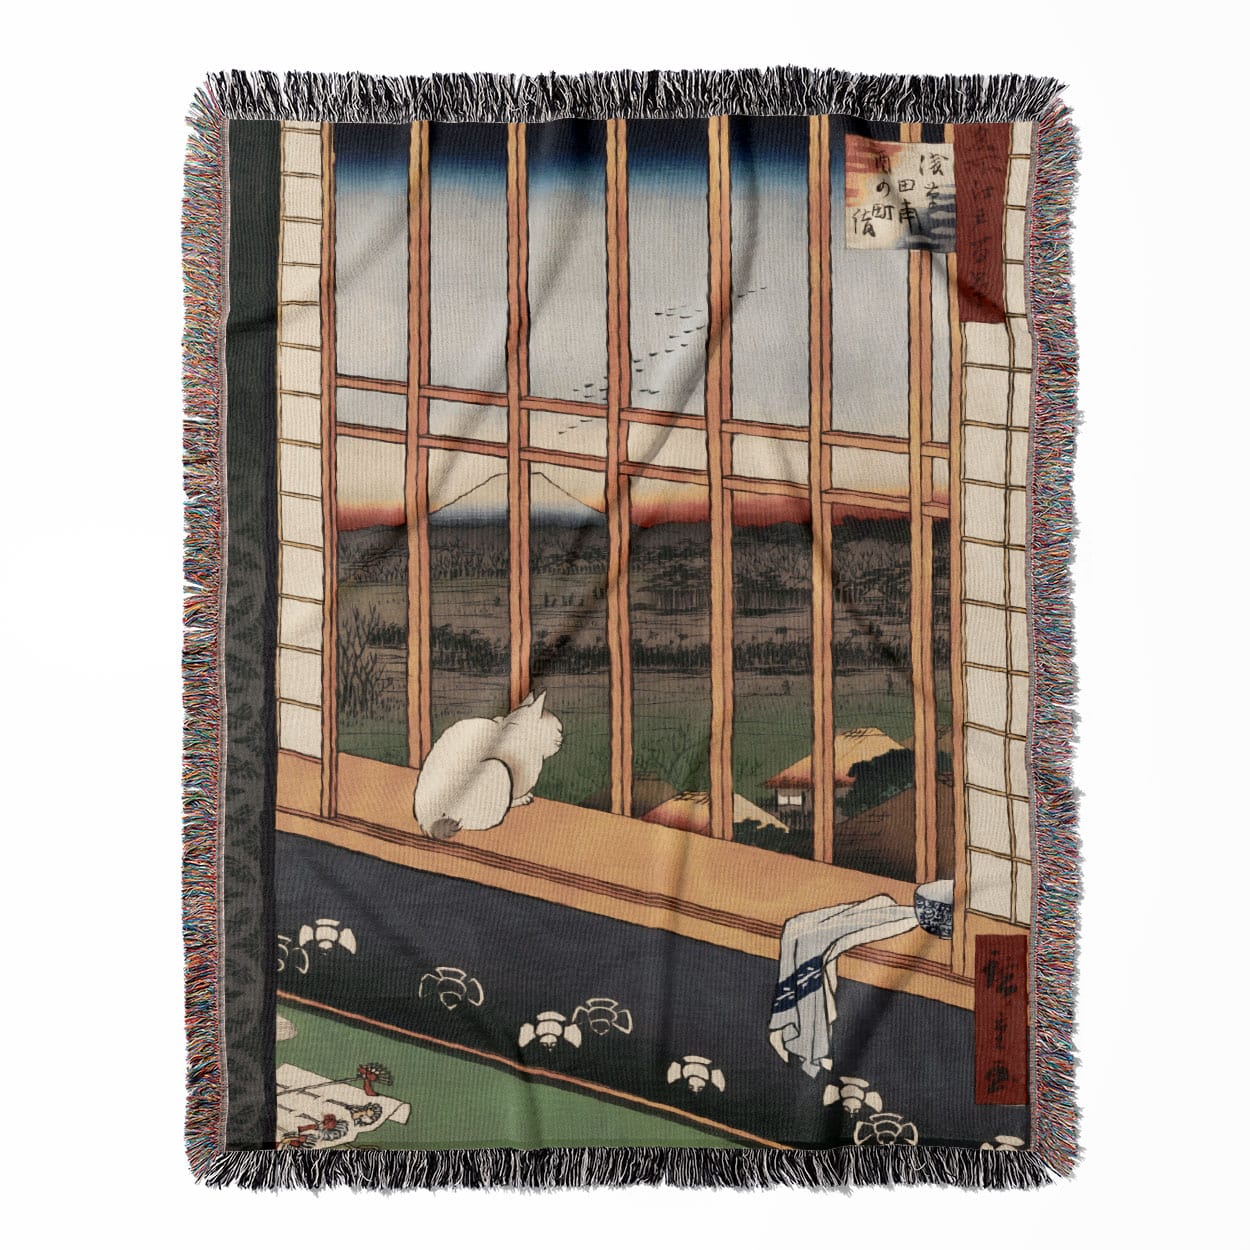 Ukiyo-e Cat by the Window woven throw blanket, made from 100% cotton, presenting a soft and cozy texture with a Japanese cat design for home decor.